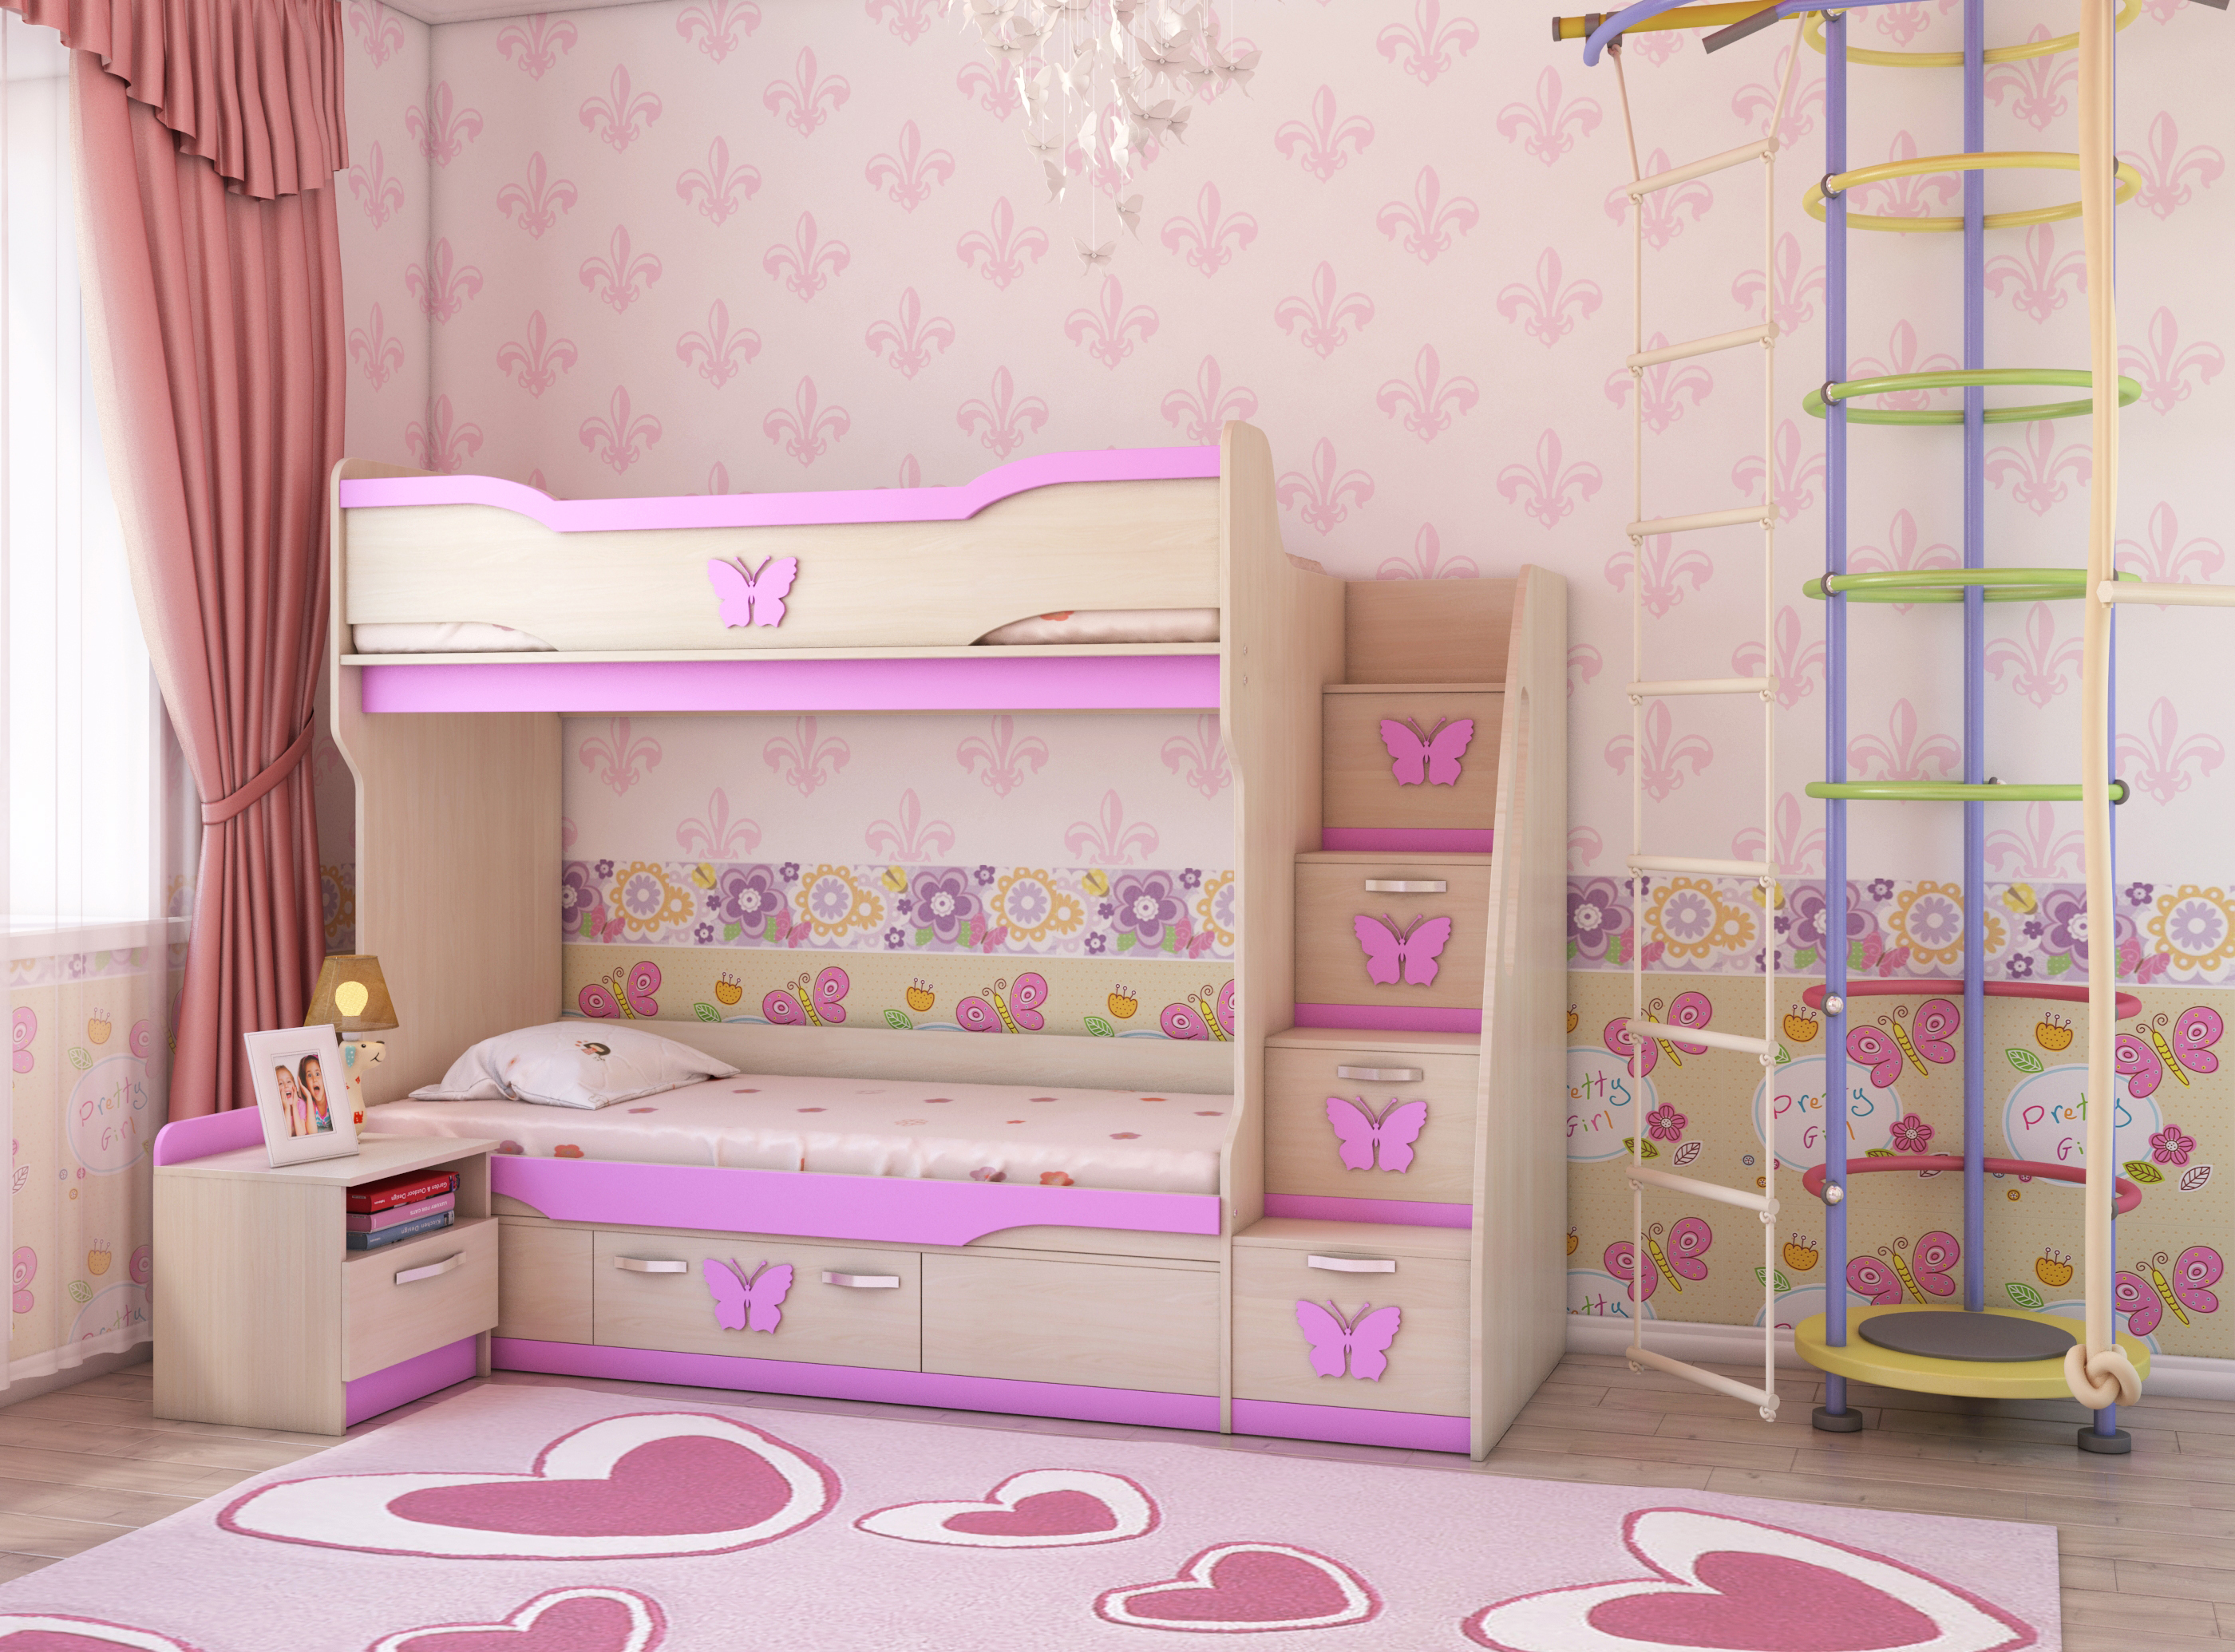 Room for girls in 3d max vray 3.0 image